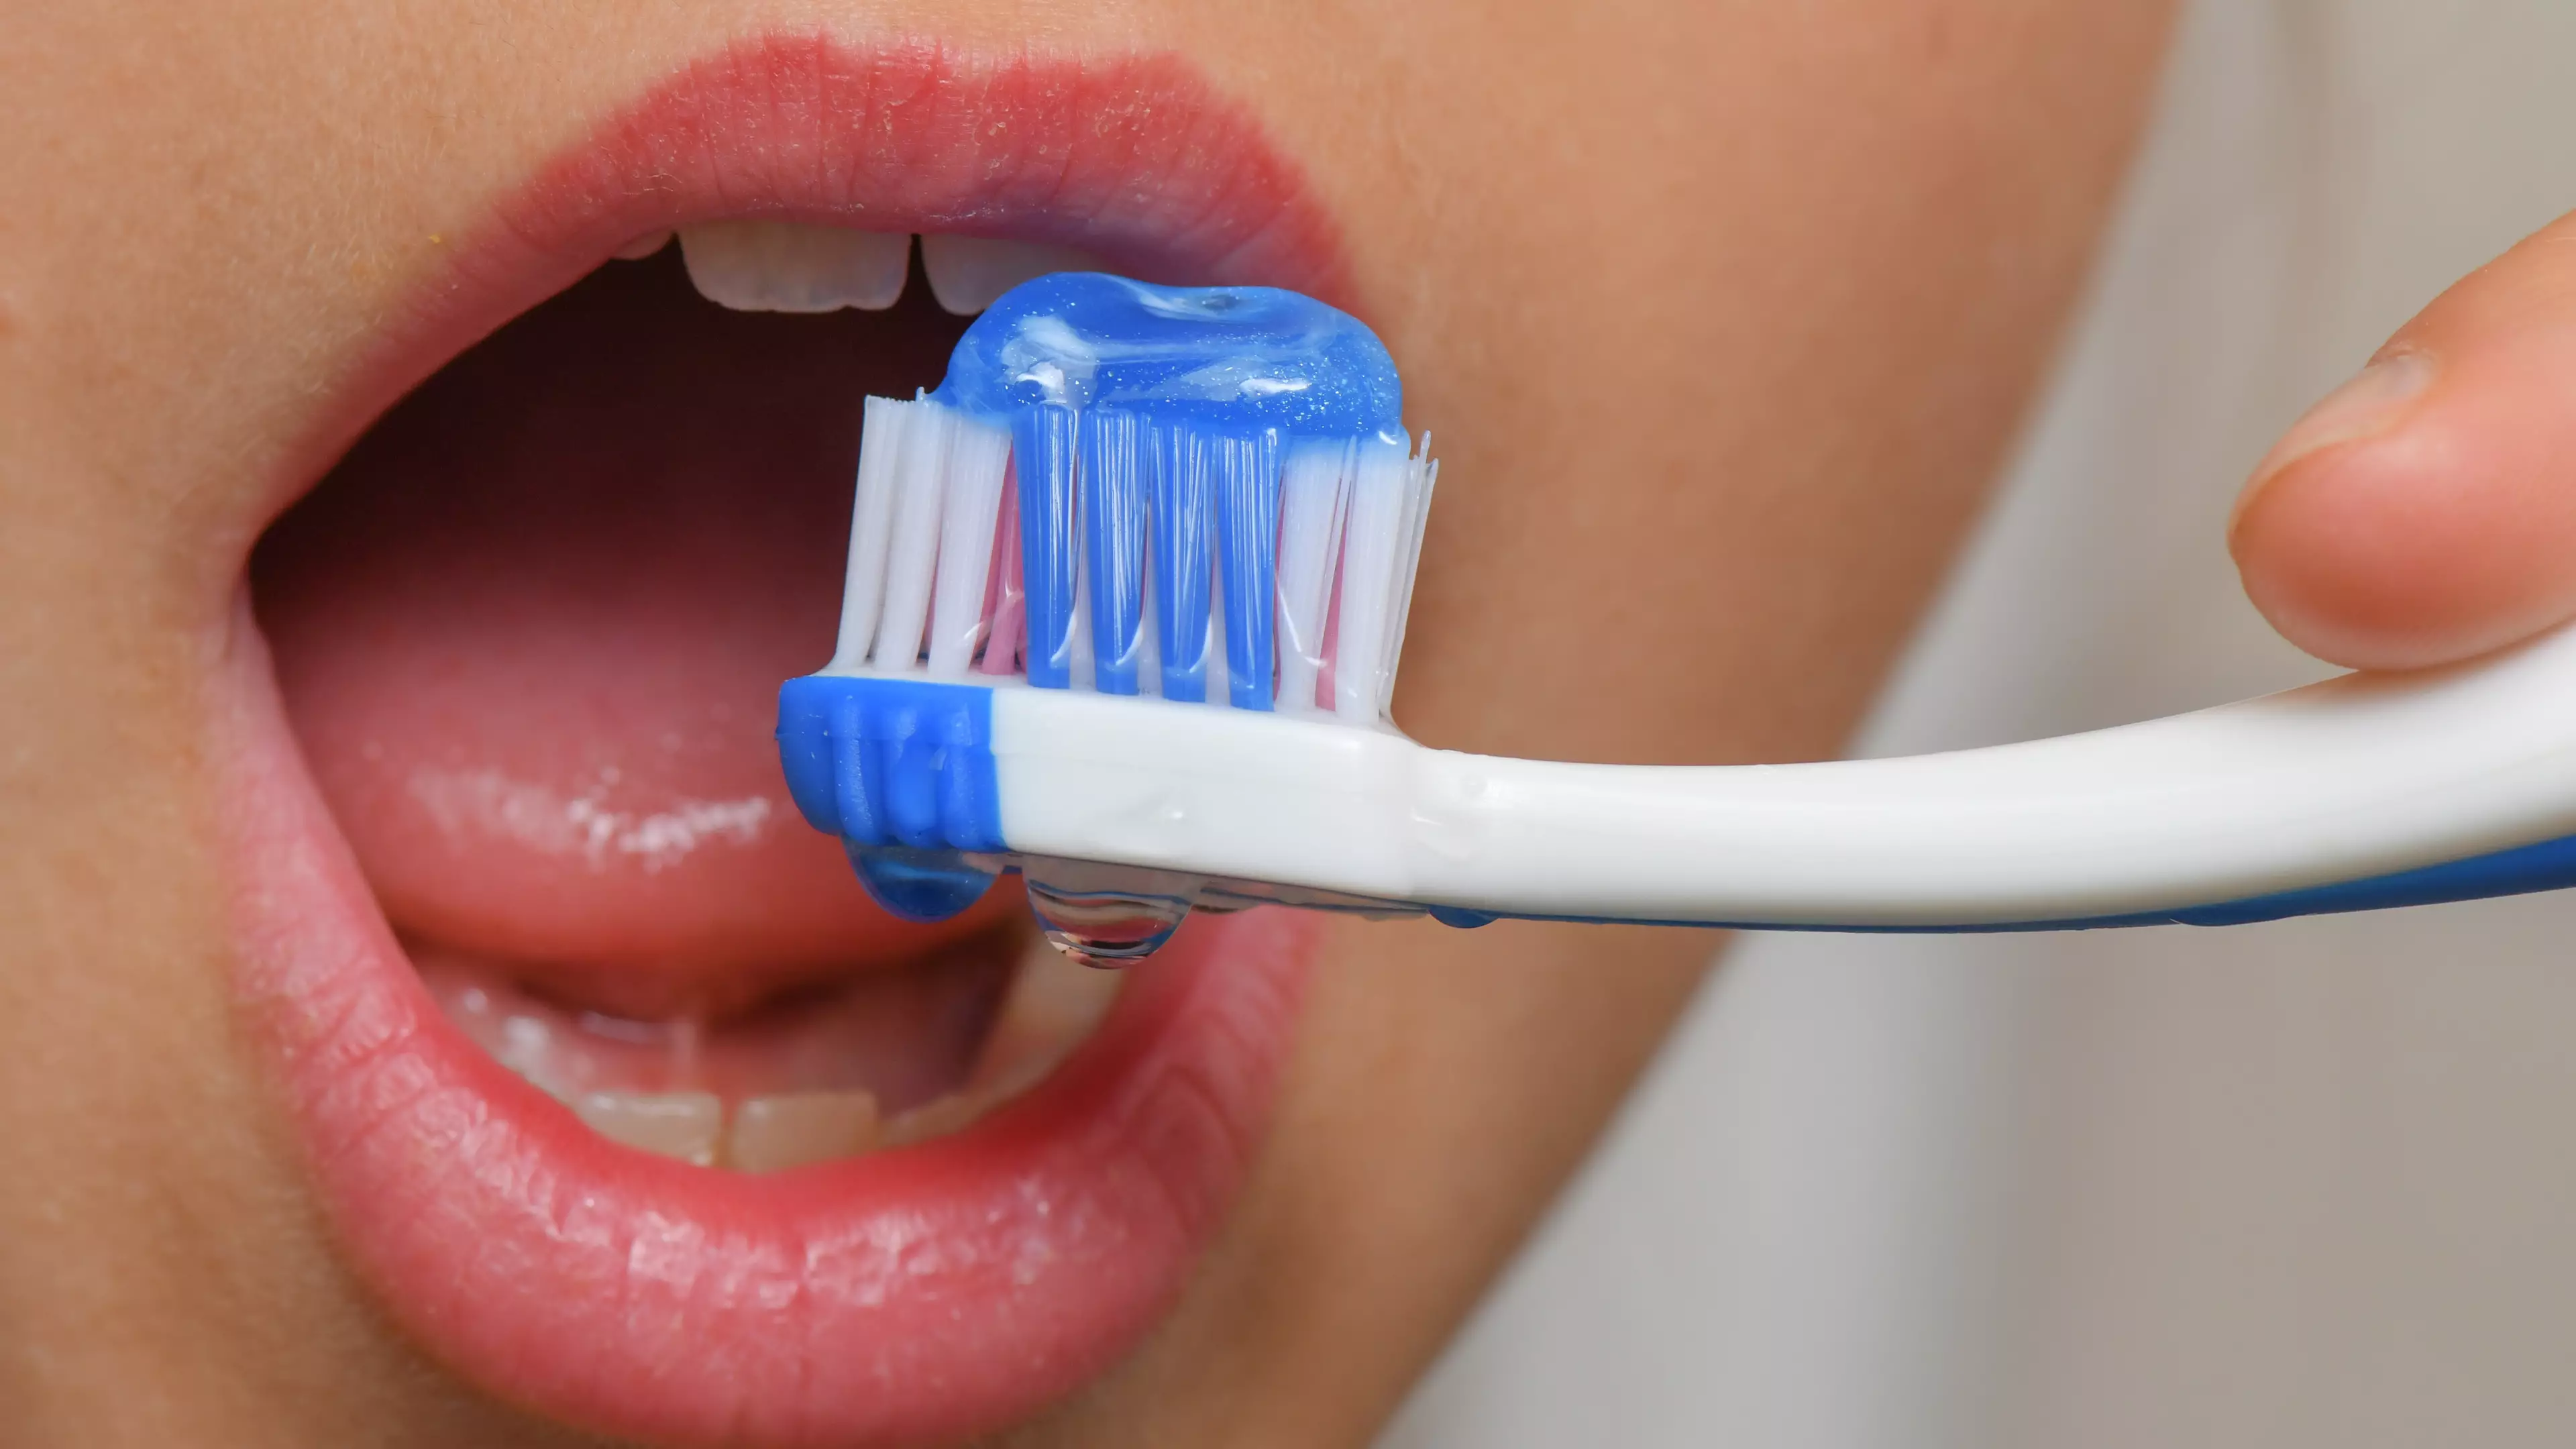 Woman Calls Police To Accuse Brother Of Farting On Her Toothbrush